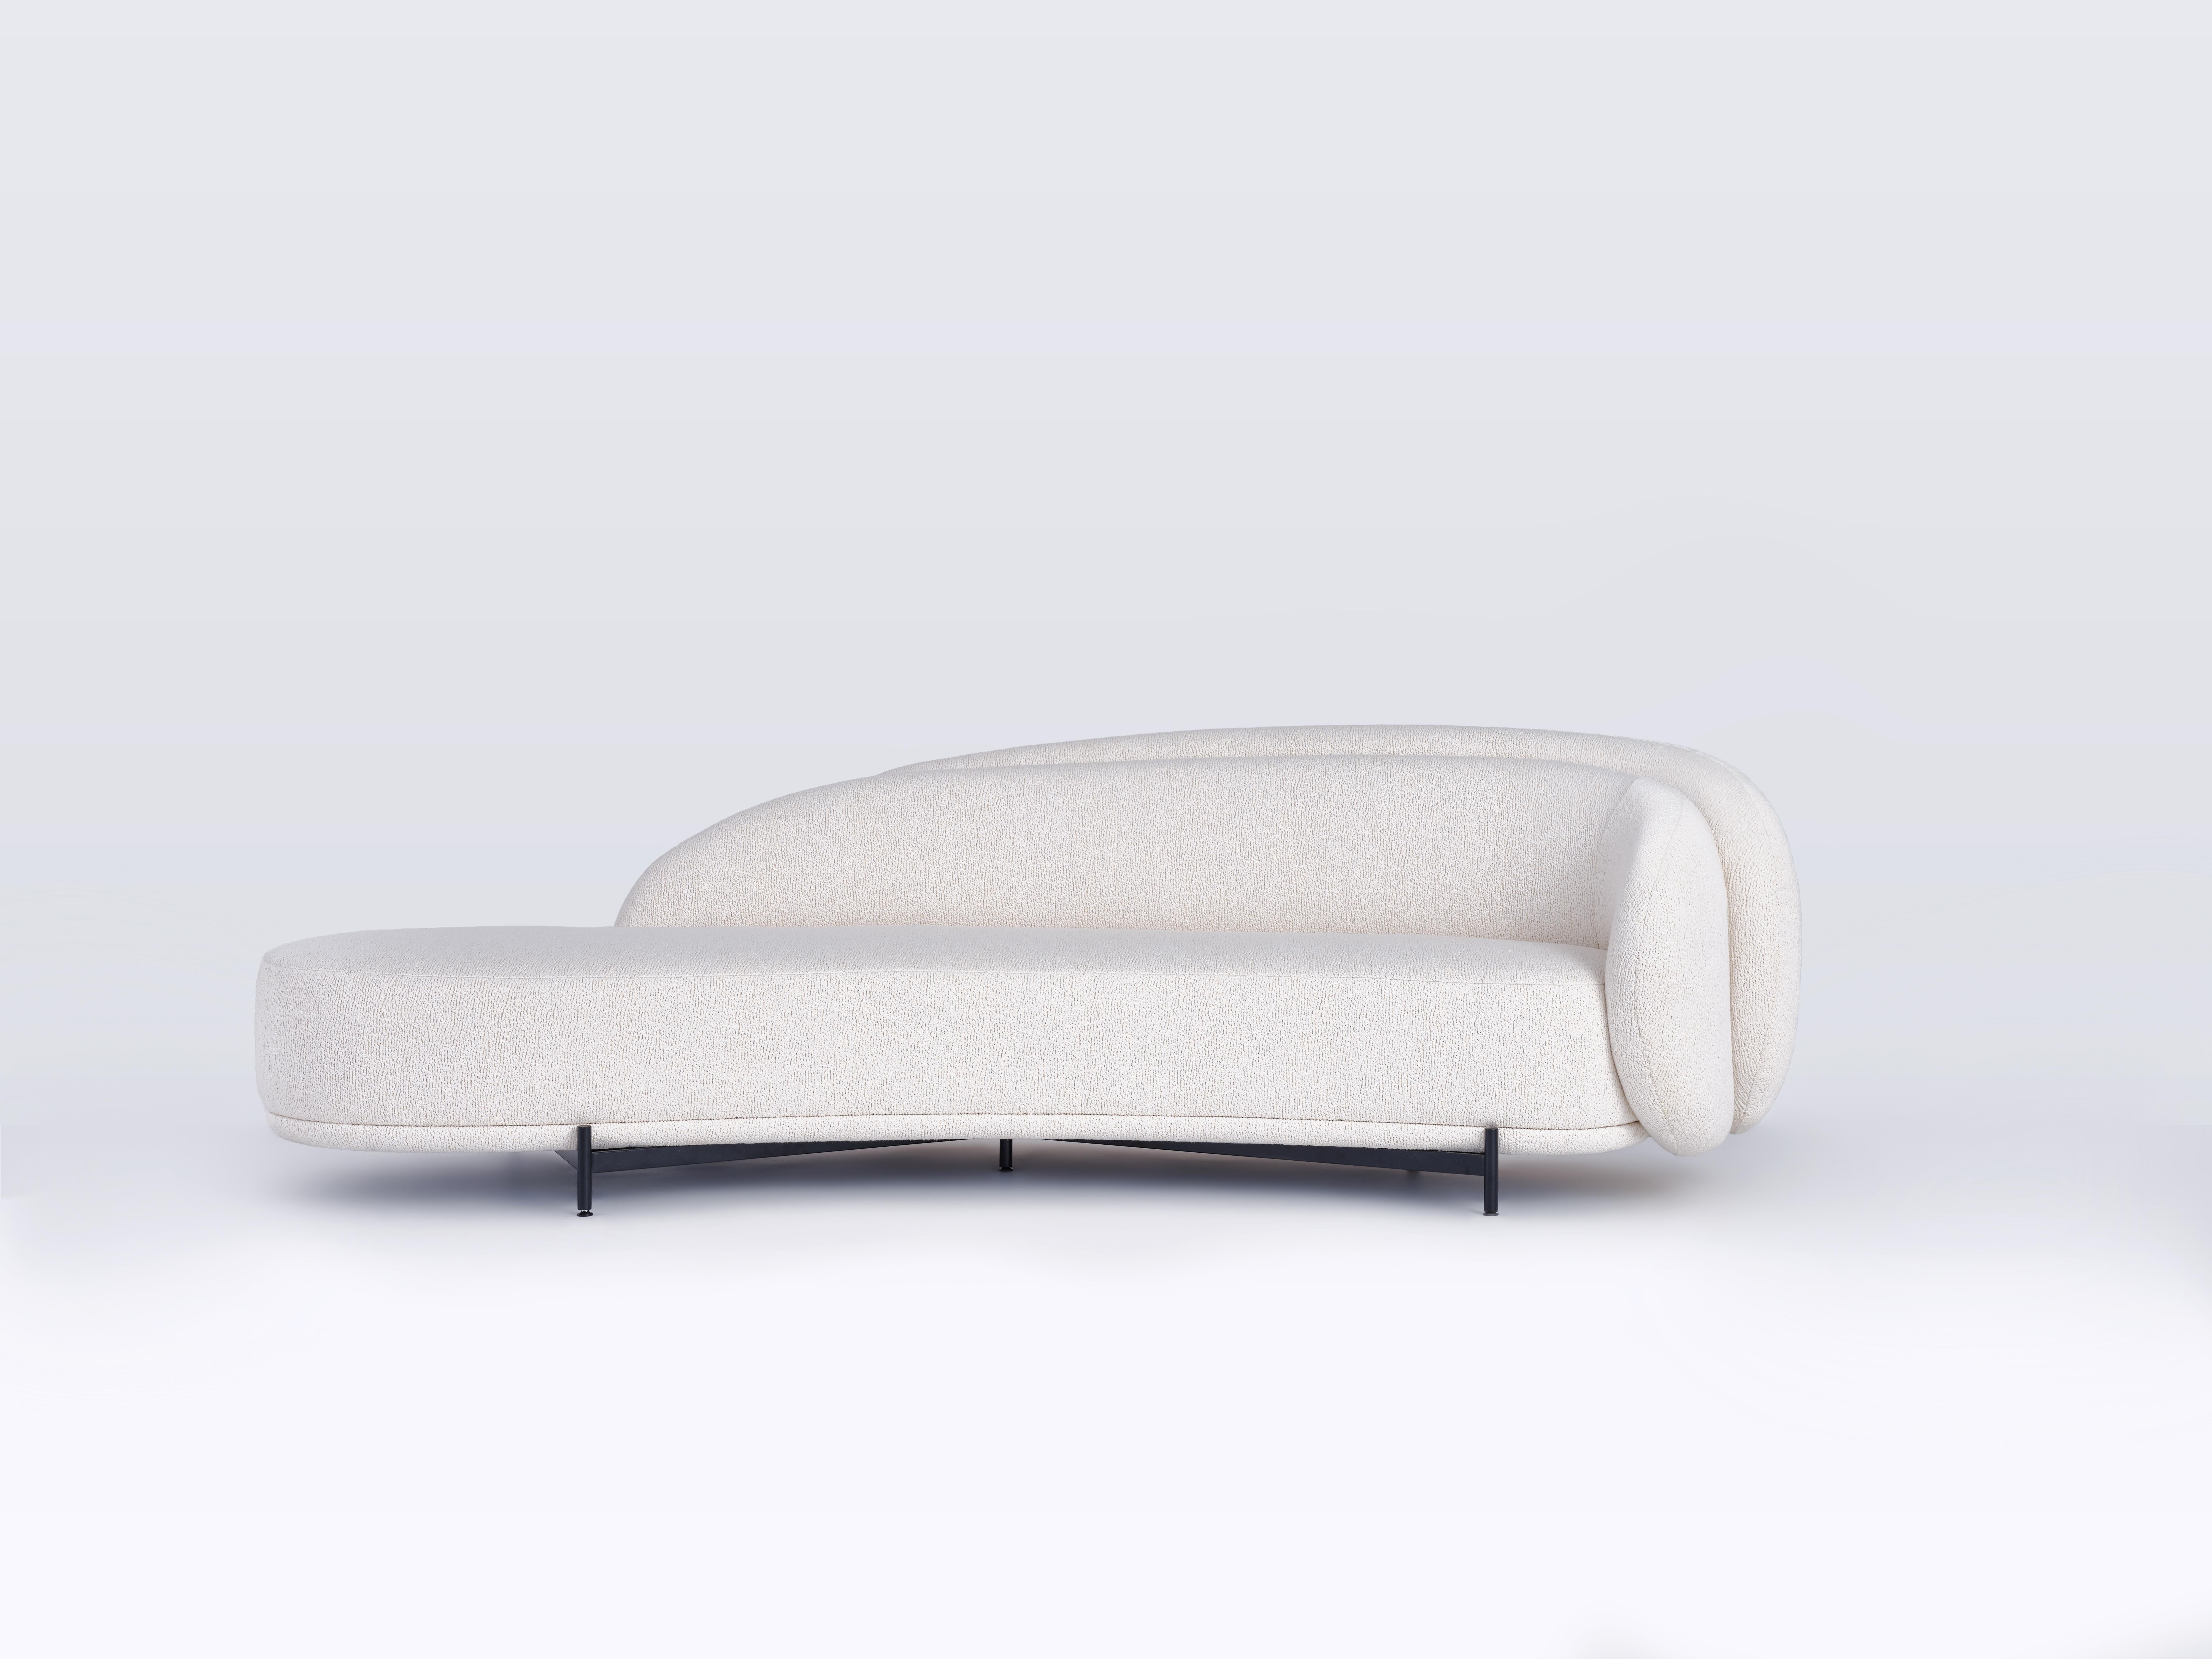 Please note the images in this listing show the Layered Back Sofa with Pierre Frey Esteban Upholstery which is not included in the list price. Please consult our Sales Team for additional information.

PRICING + COM
This Paolo Ferrari design is